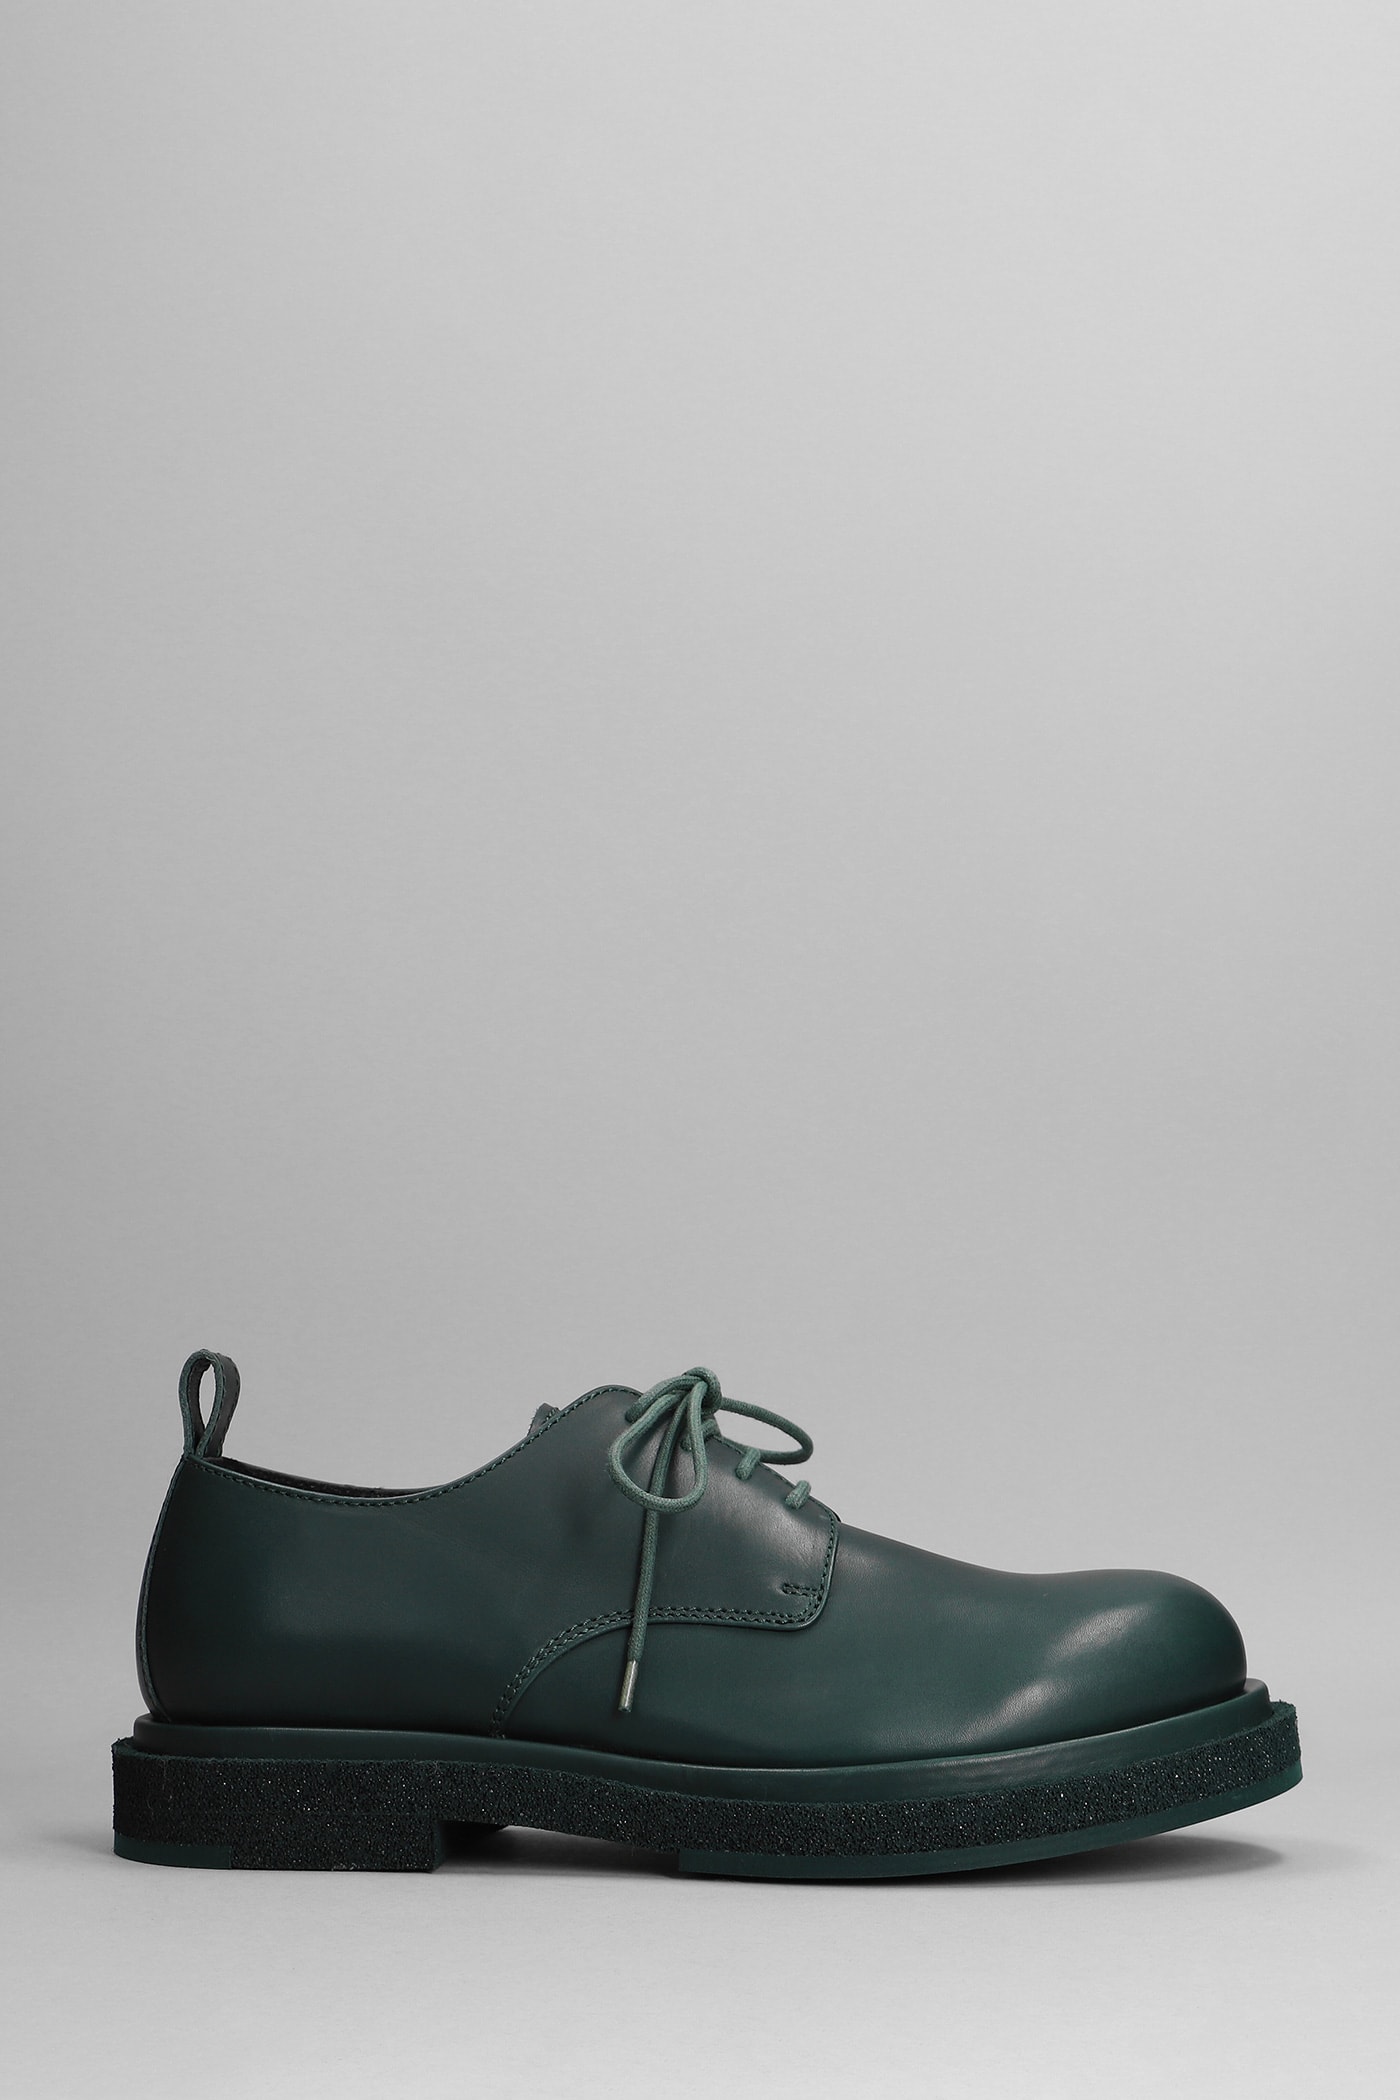 Officine Creative Tonal 001 Lace Up Shoes In Green Leather